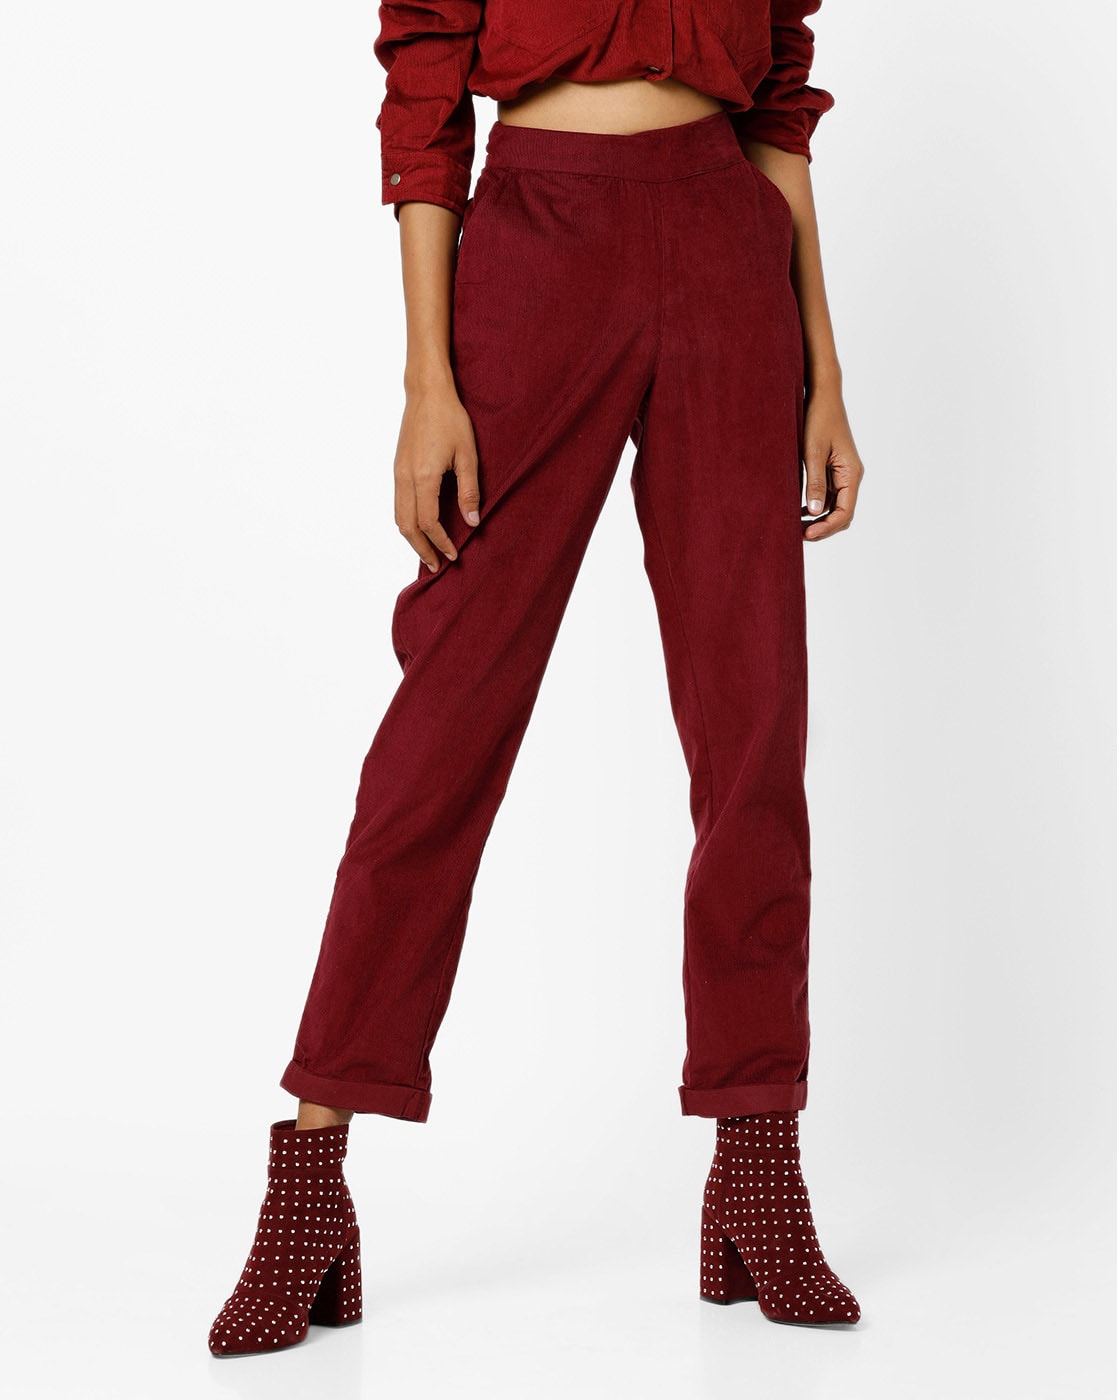 Ladies Corduroy Trousers Suppliers 19161747  Wholesale Manufacturers and  Exporters